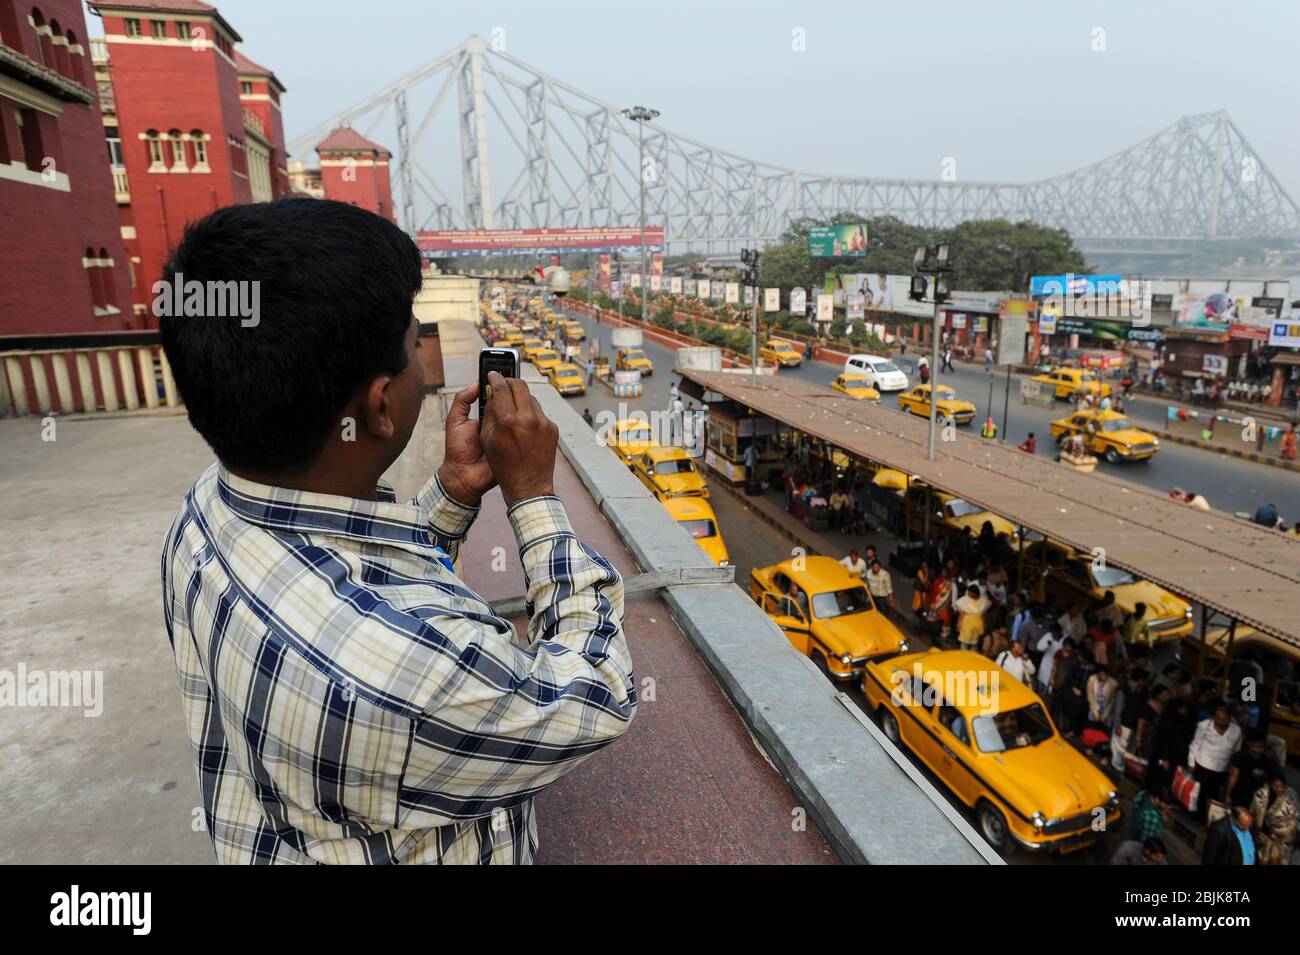 01.12.2011, Kolkata (Calcutta), West Bengal, India, Asia - Man uses his moblie phone at the Howrah Junction Railway Station with view of Howrah Bridge. Stock Photo